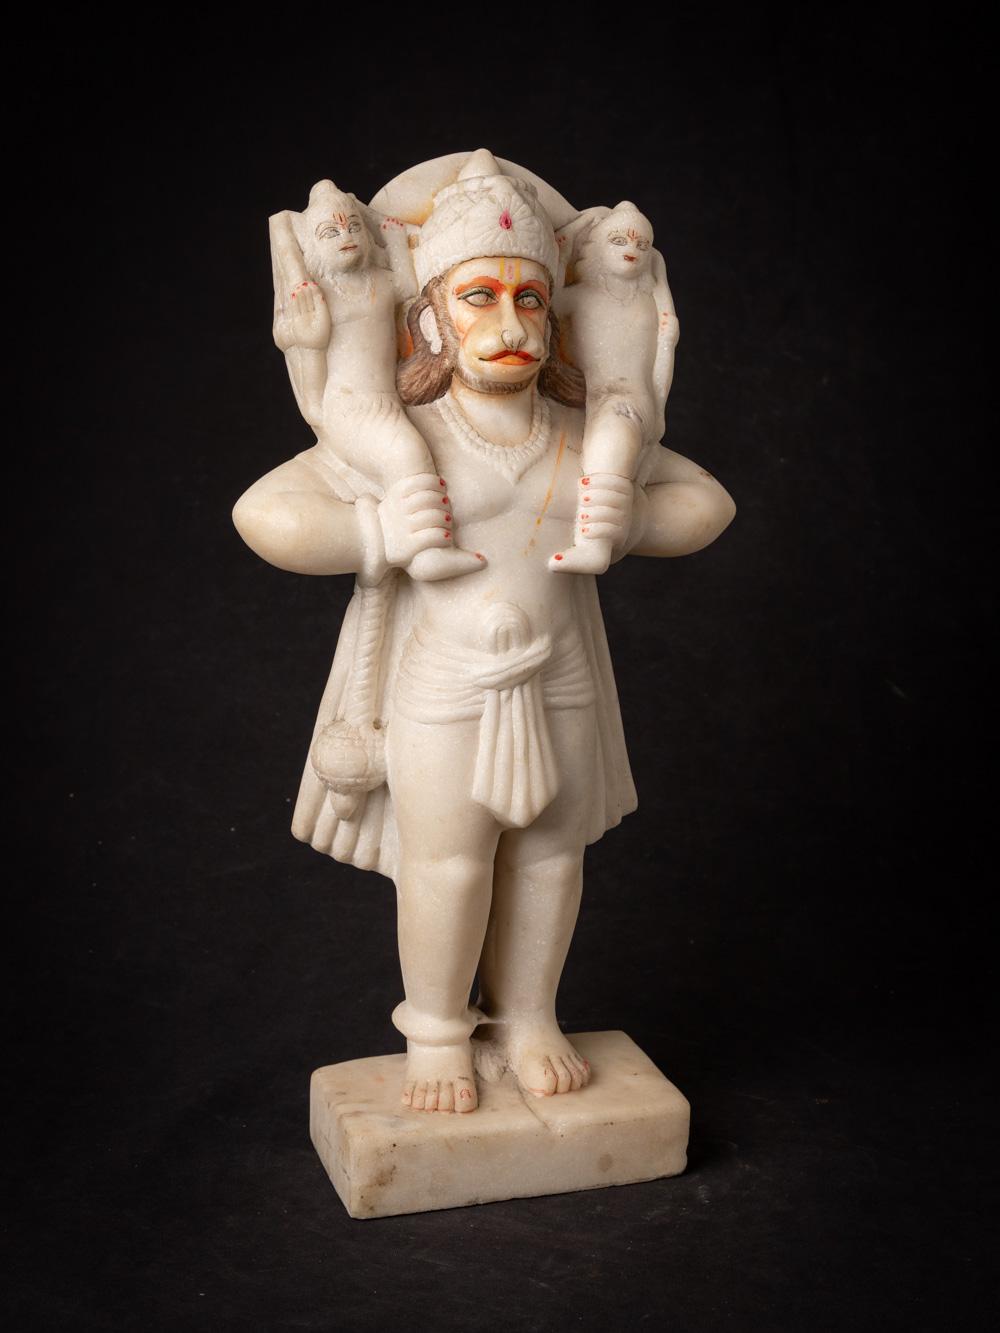 Marble Middle 20th century old marble Hanuman statue from India - Original Buddhas For Sale